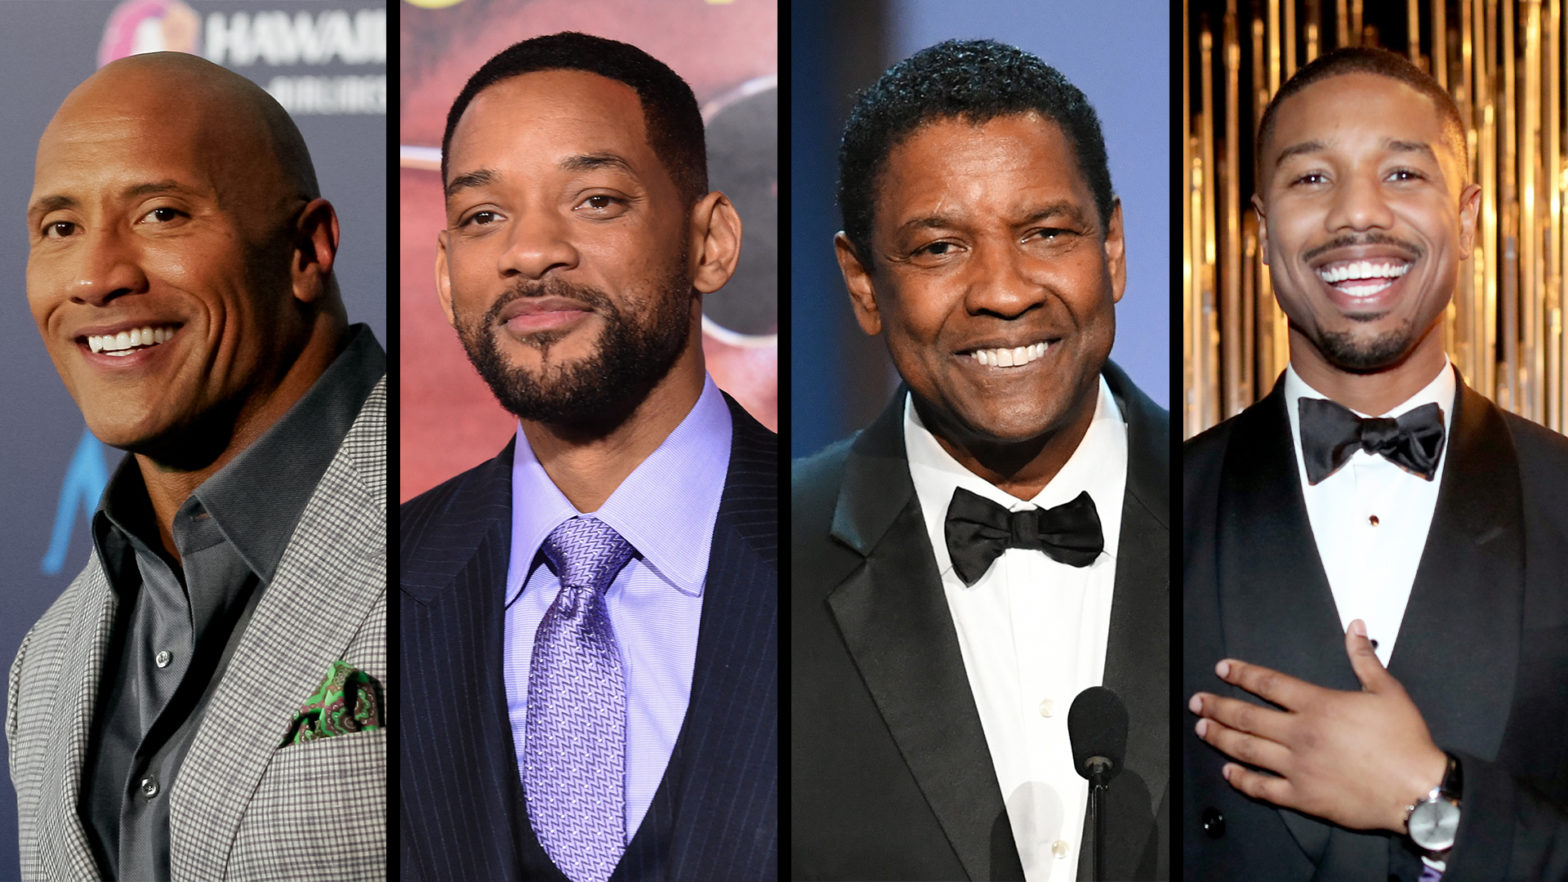 Of The Movie Stars Who Make The Biggest Salaries In Hollywood, Only 4 Are Black — And None Are Black Women